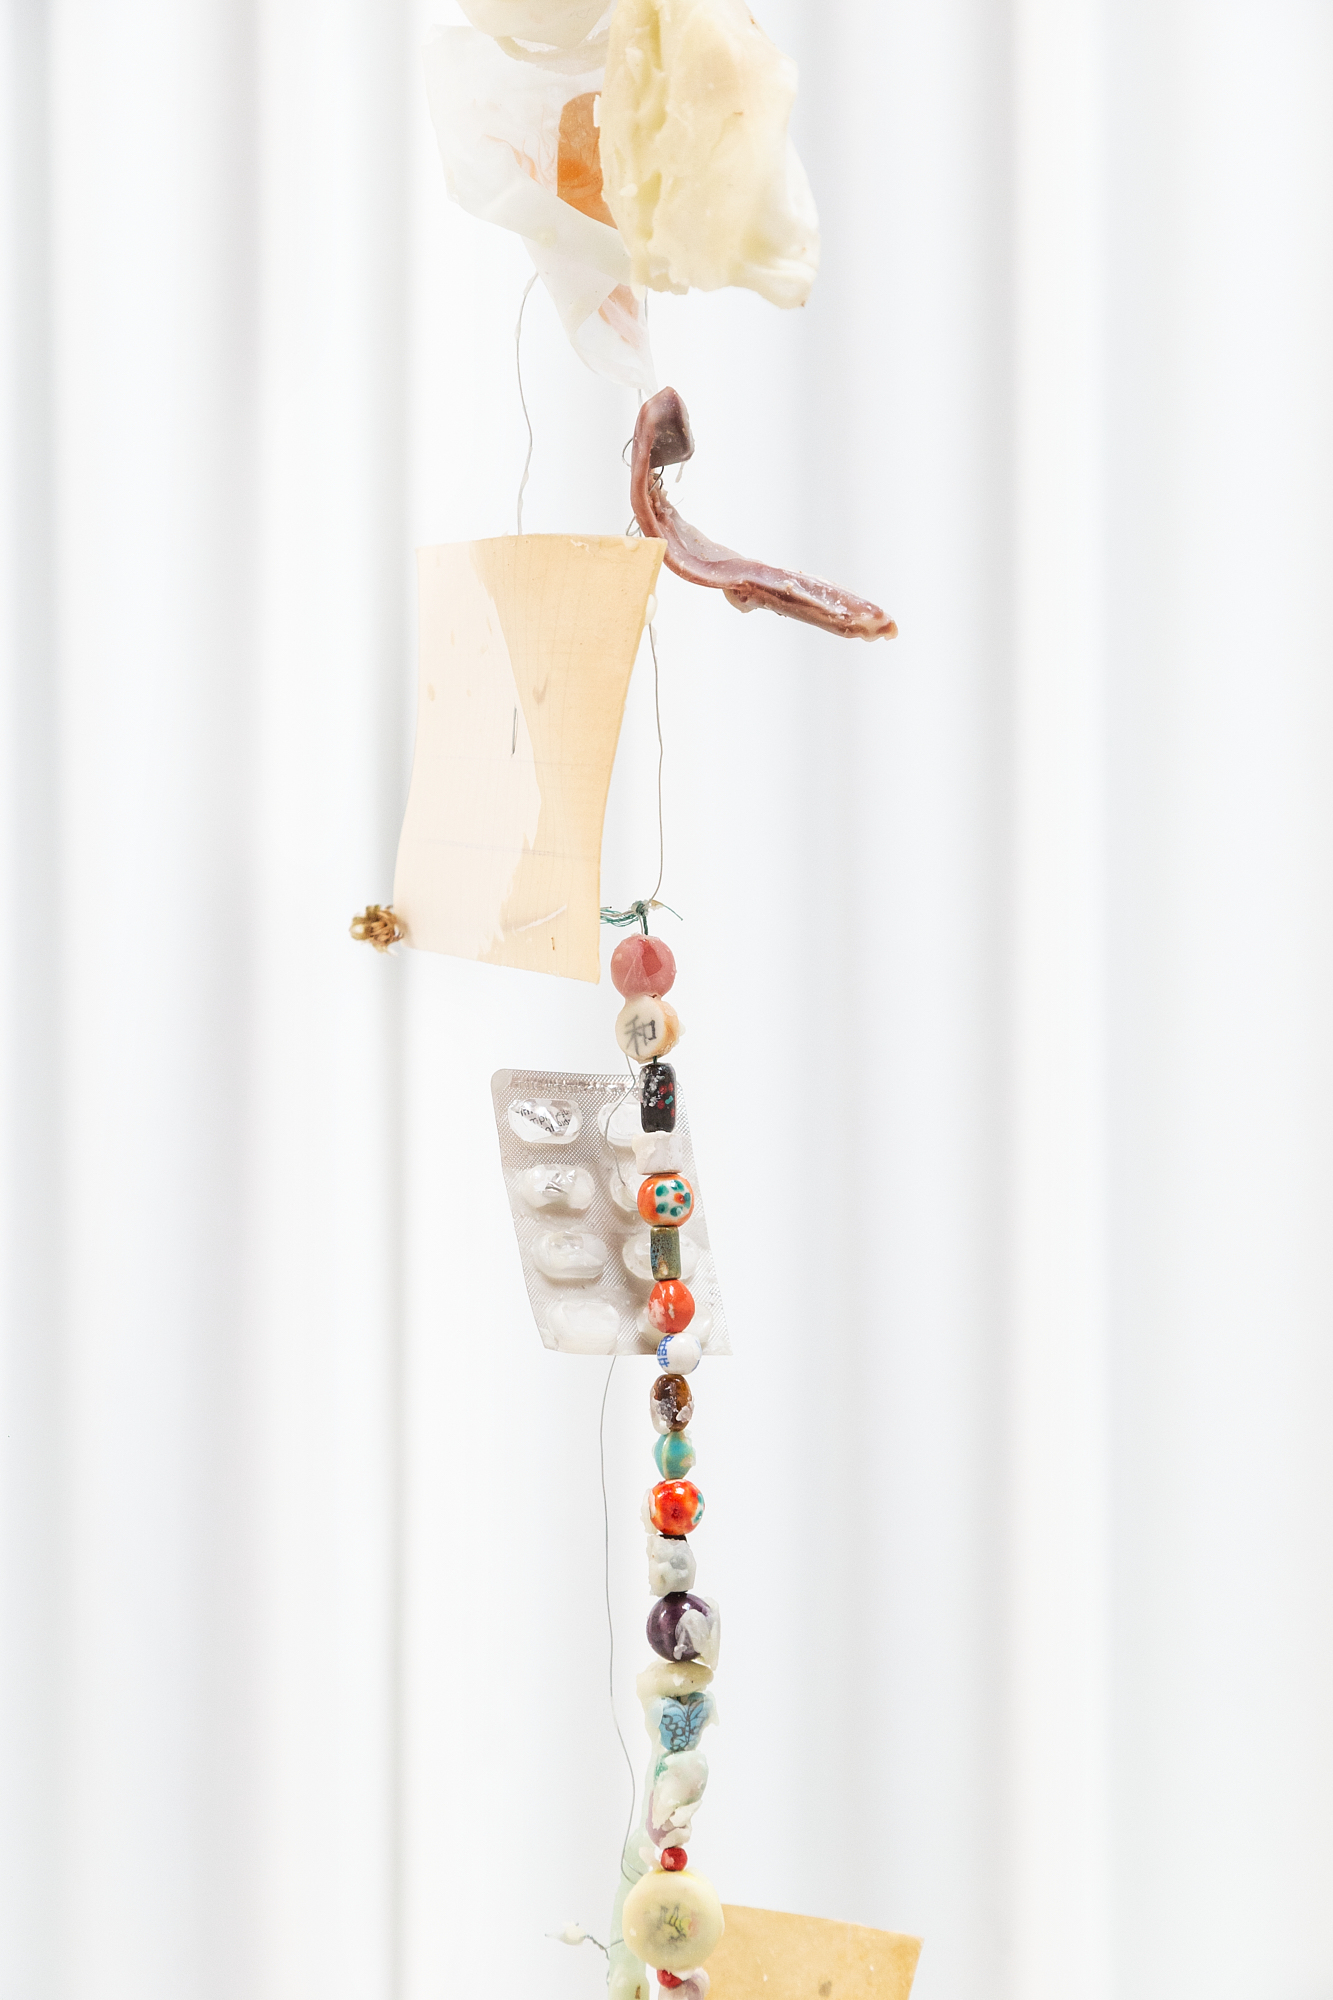 Installation View Detail, Reliquias II, Found objects, Aluminium wire, Paper and Wax, 3m high, 2022